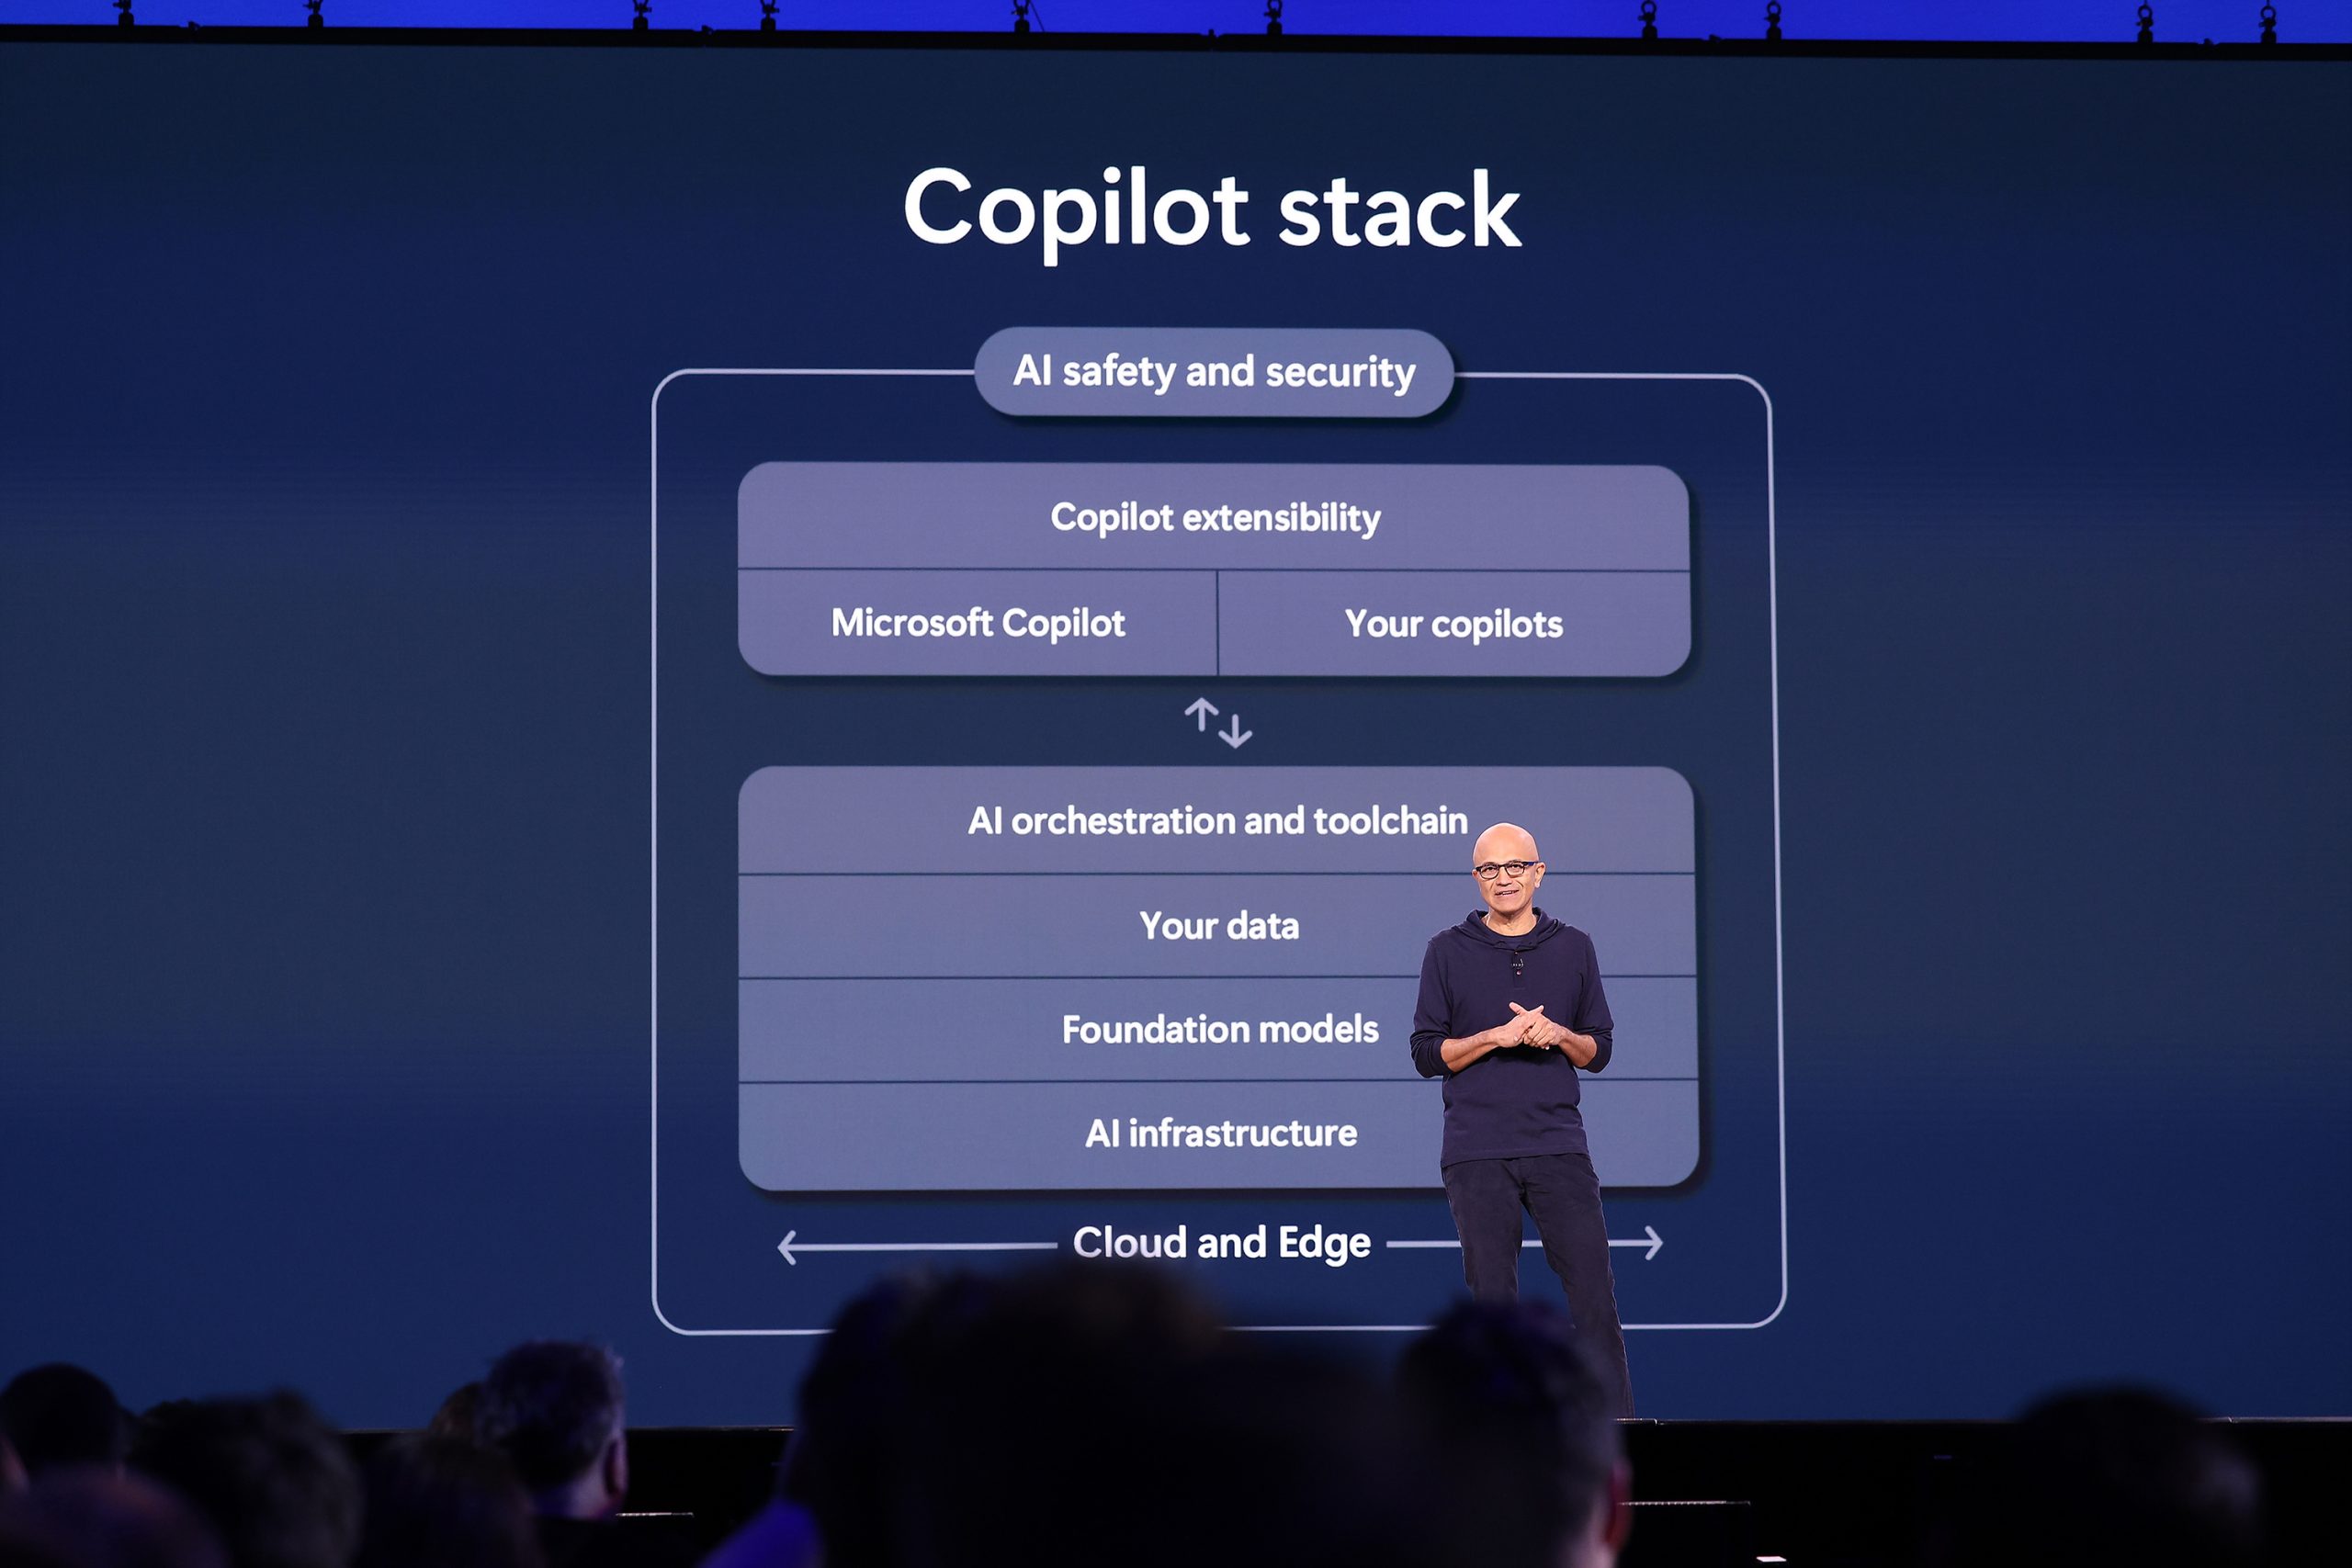 A man standing on stage with text on a screen behind him explaining the Copilot stack